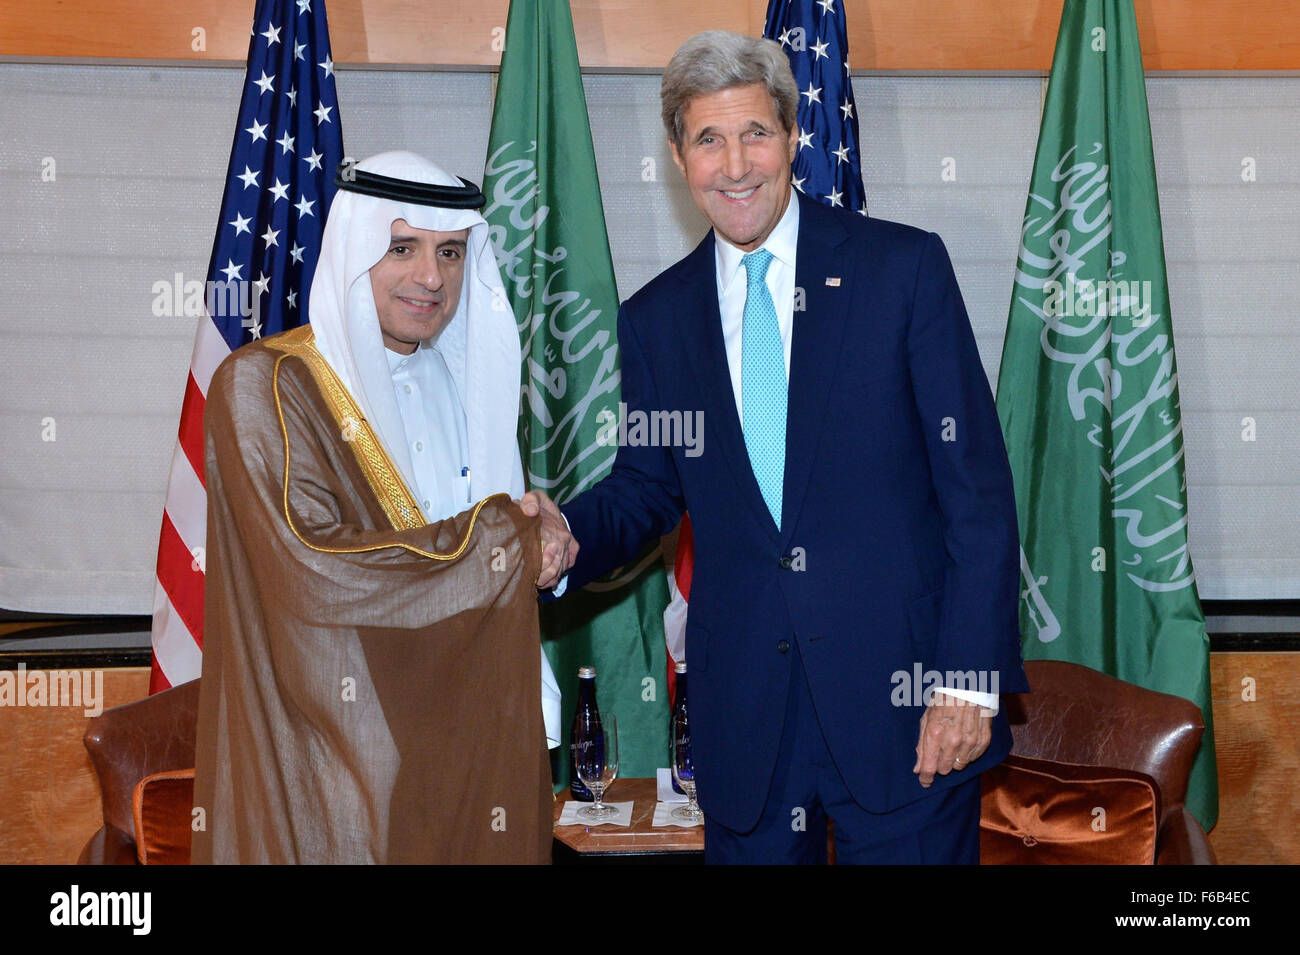 Secretary Kerry Poses for a Photo With Saudi Foreign Minister al-Jubeir Before Their Bilateral Meeting in New York City Stock Photo